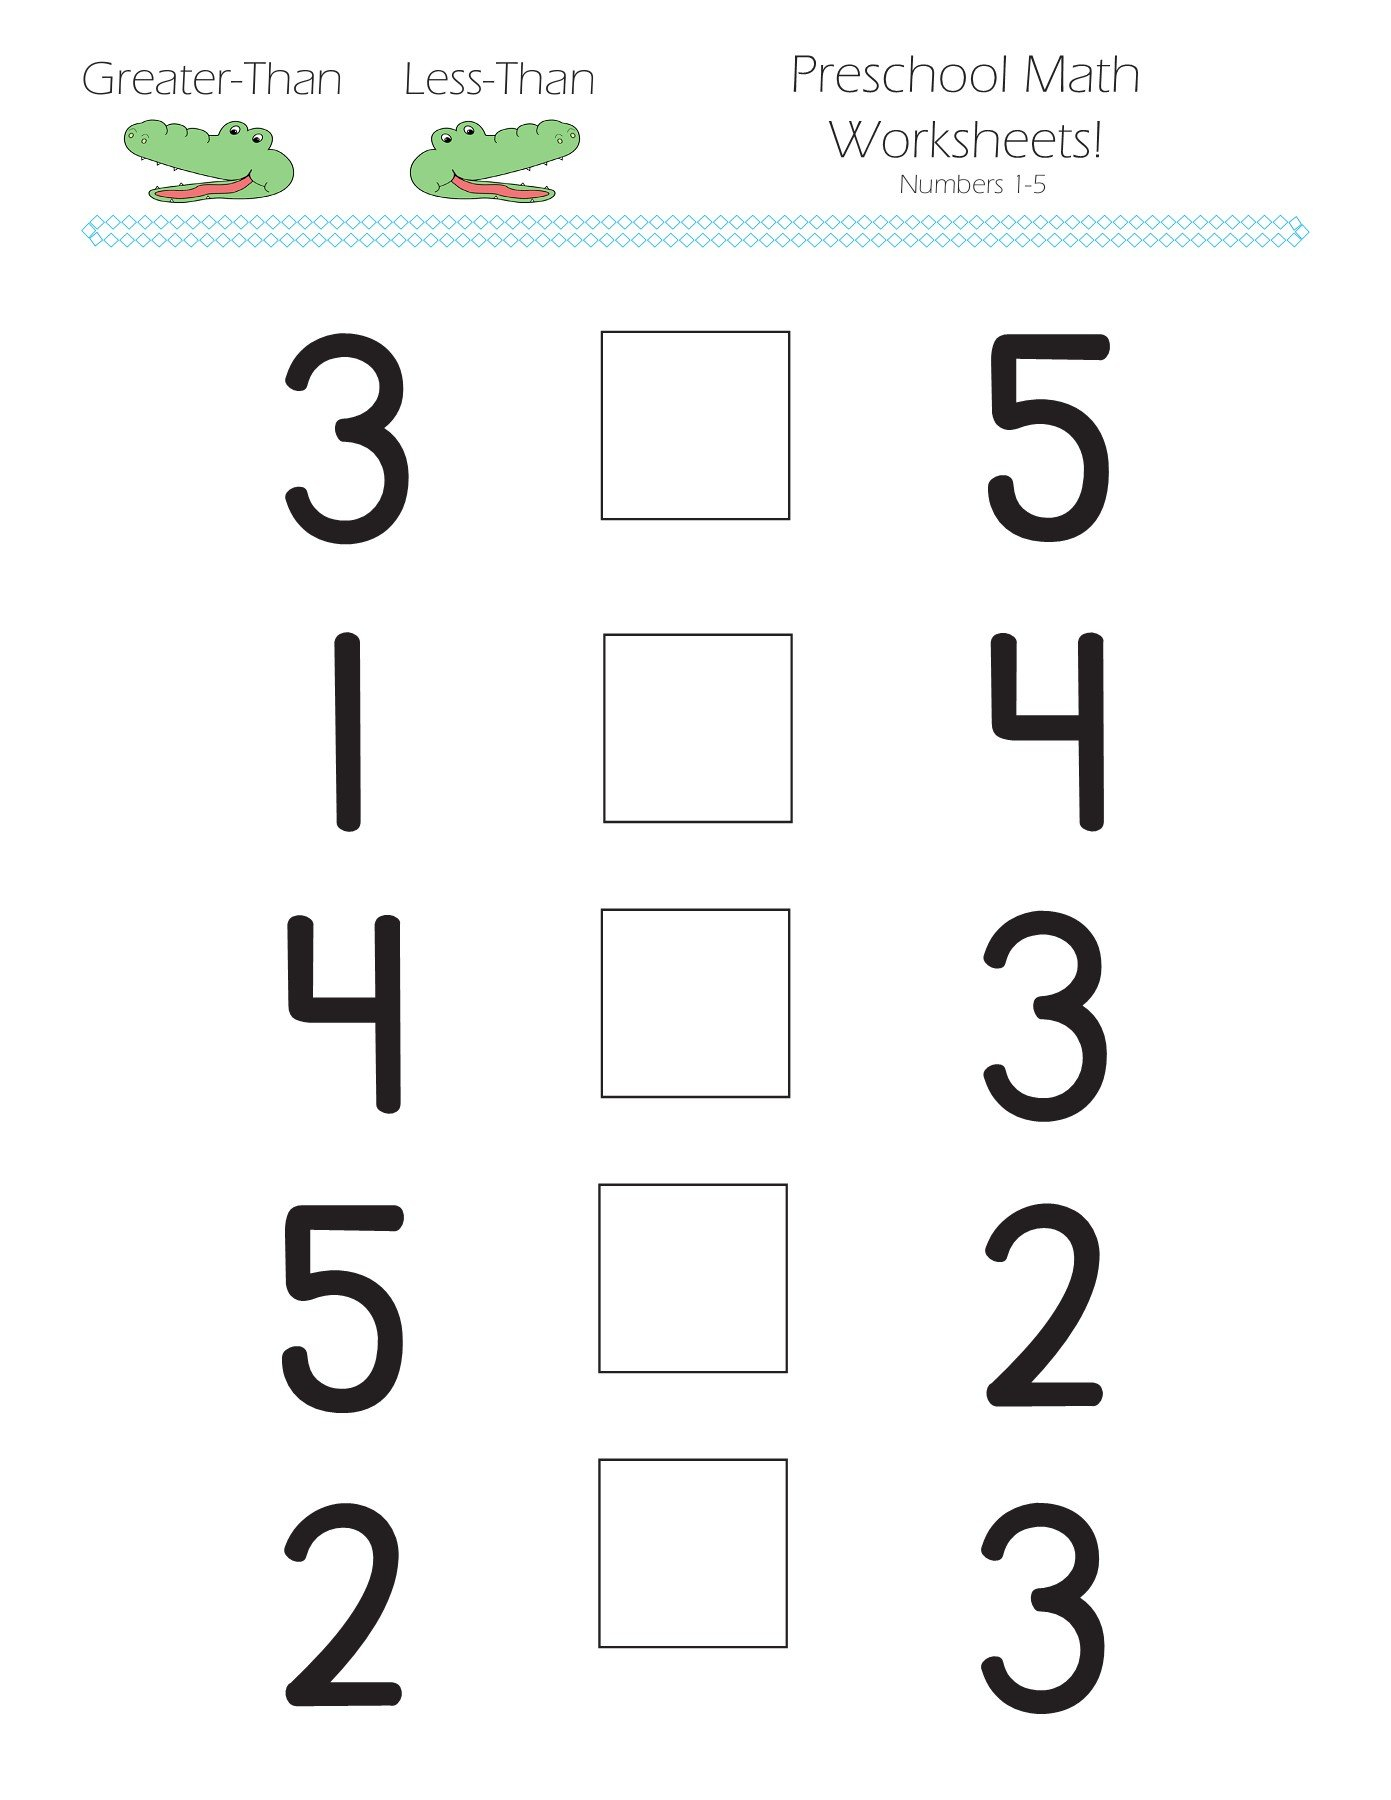 Greaterthan Lessthan Preschool Math Worksheets  Anyflip Throughout Greater Than And Less Than Worksheets